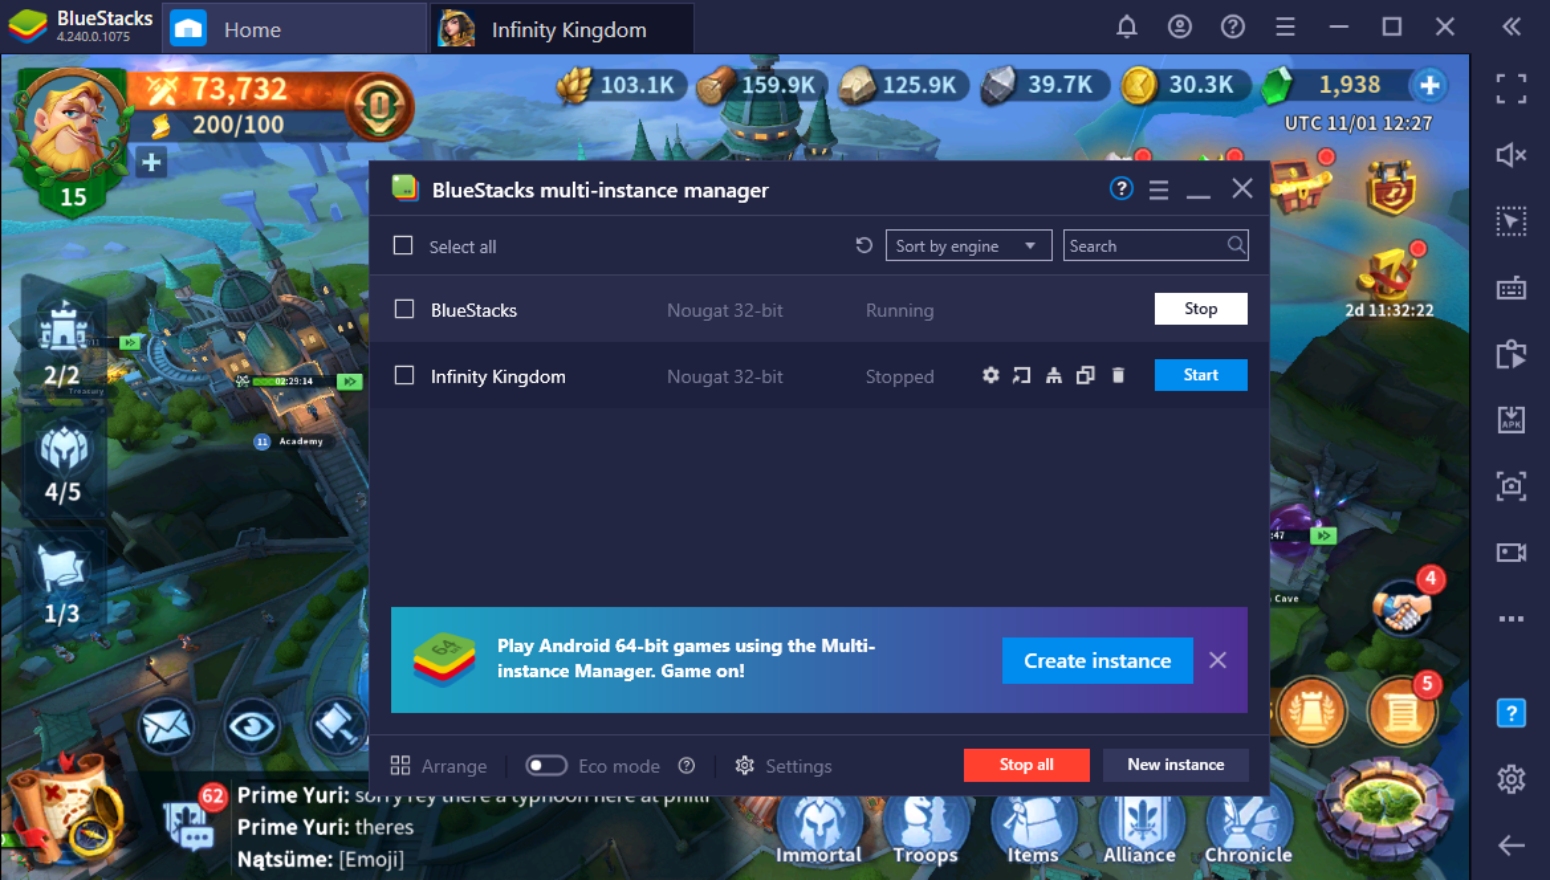 How To Play Infinity Kingdom On PC With BlueStacks